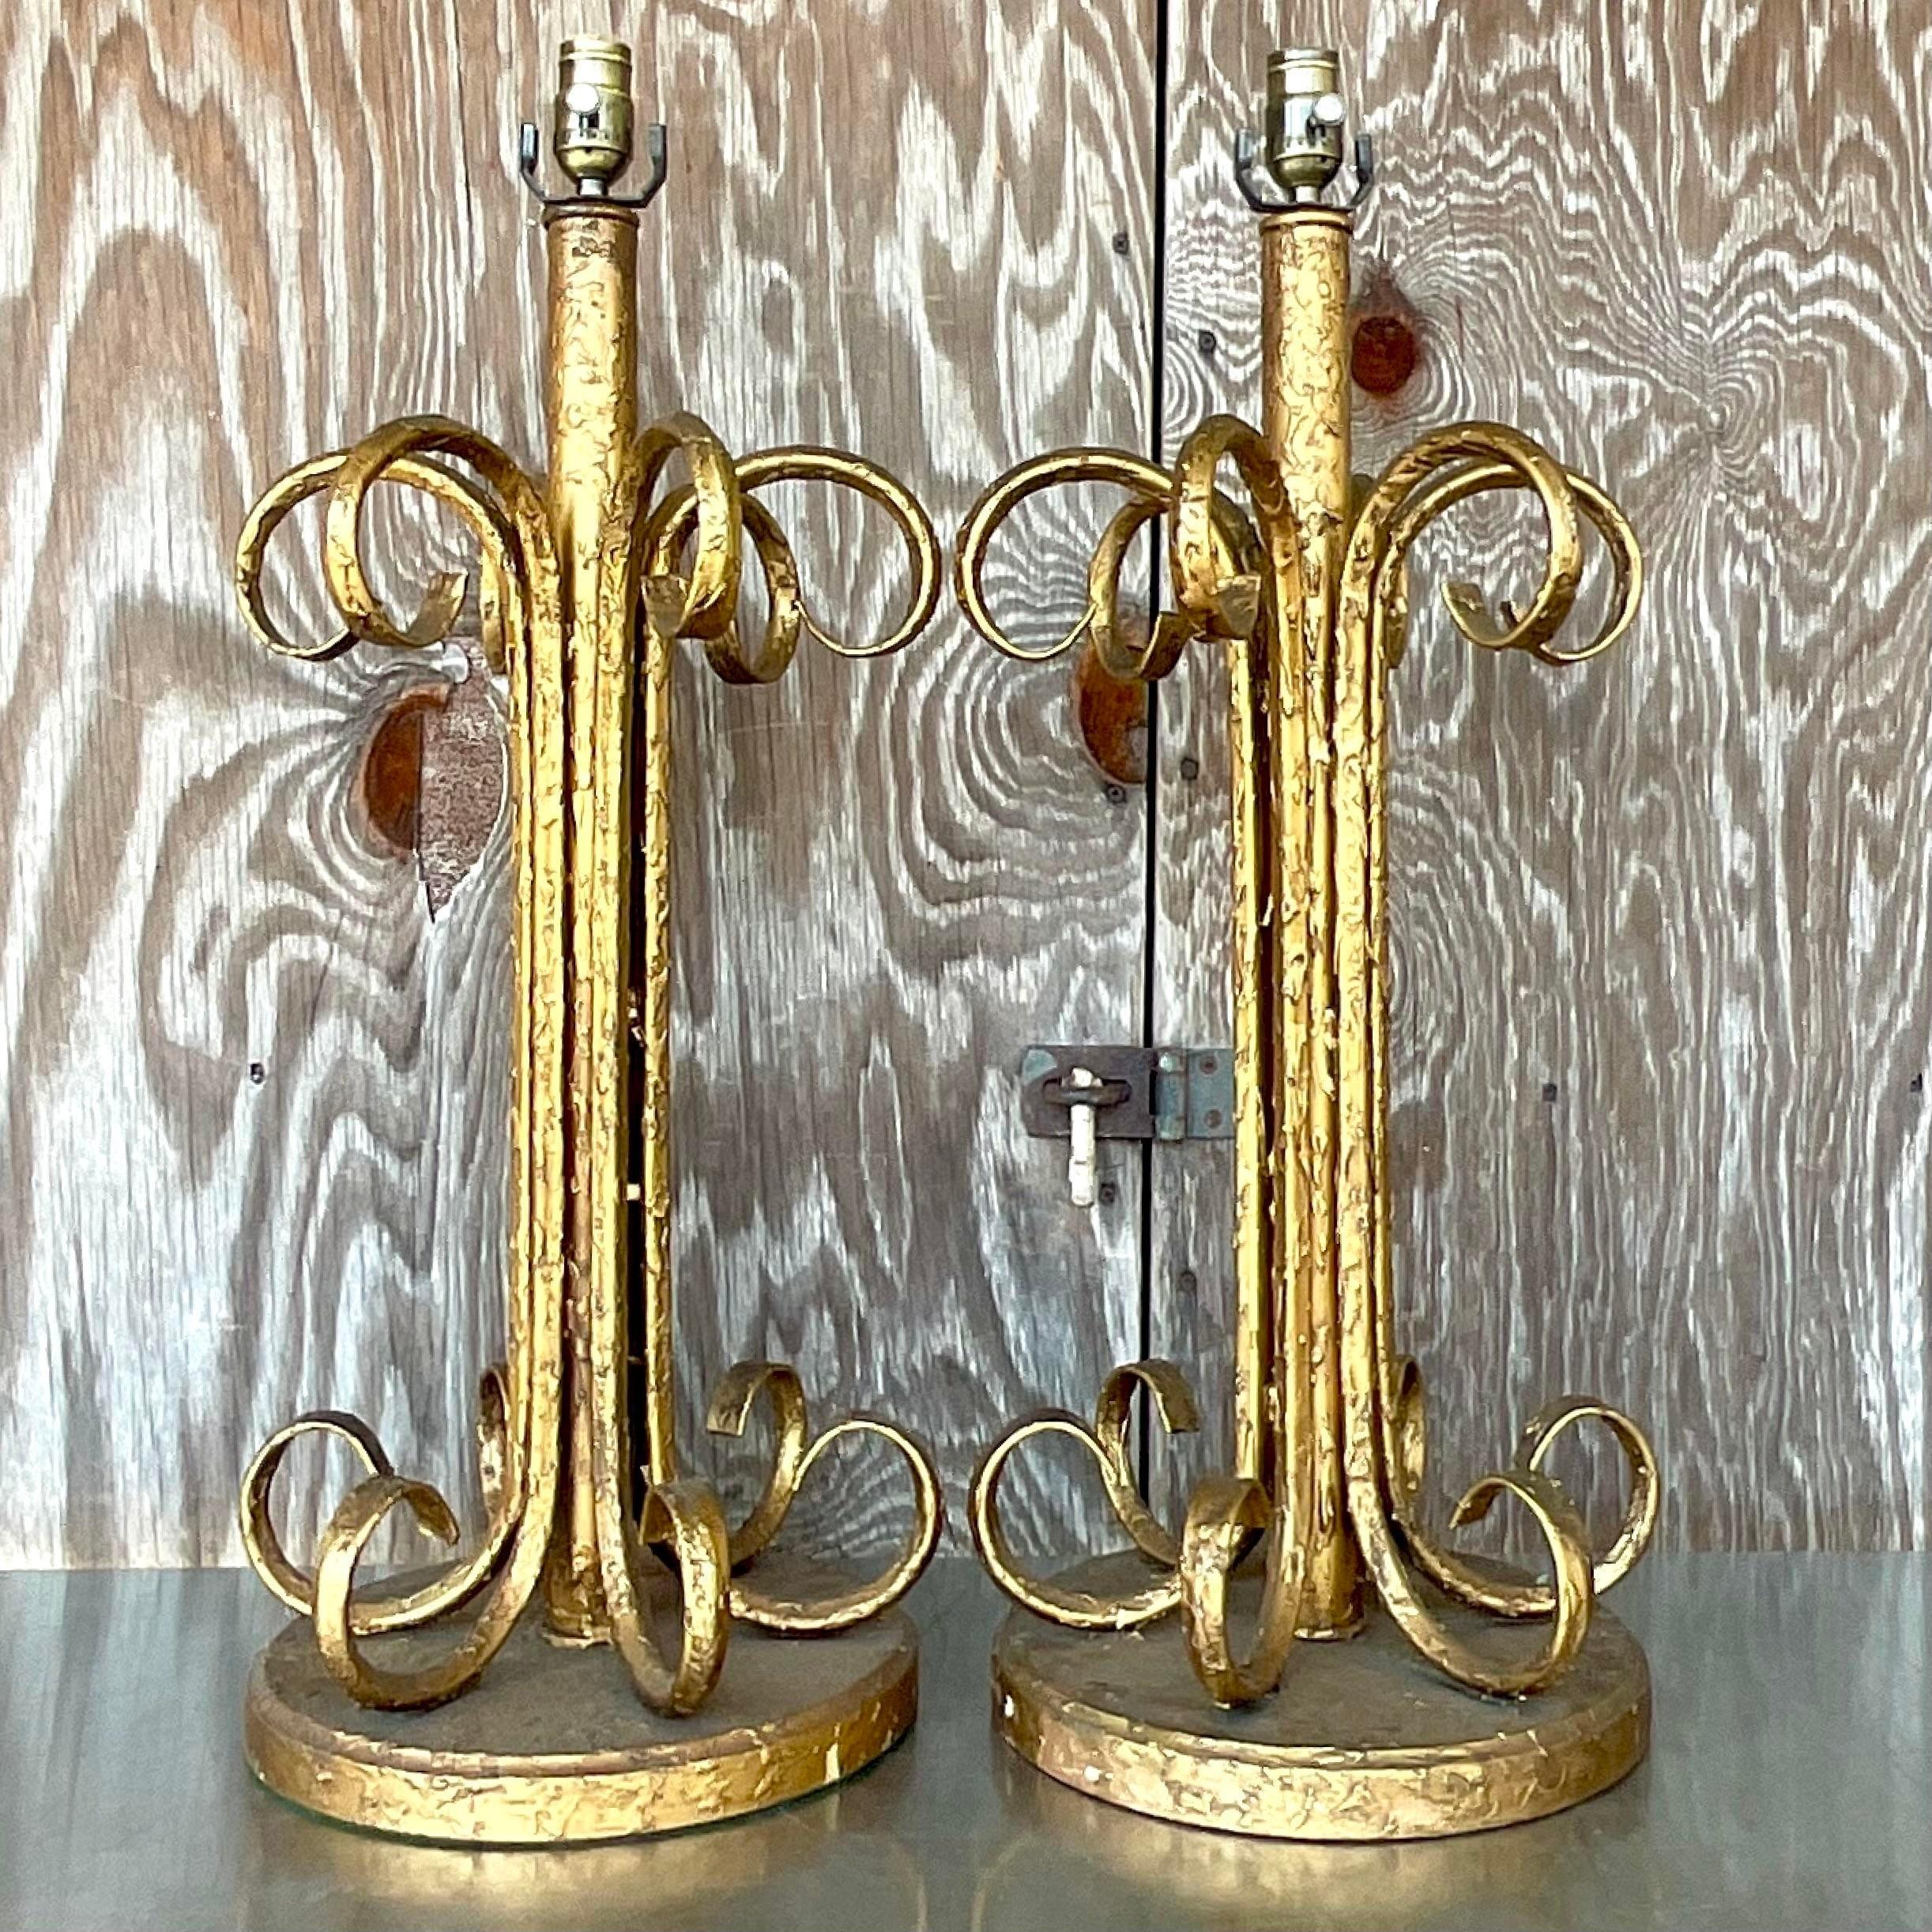 20th Century Vintage Boho Gilt Scroll Lamps - a Pair For Sale